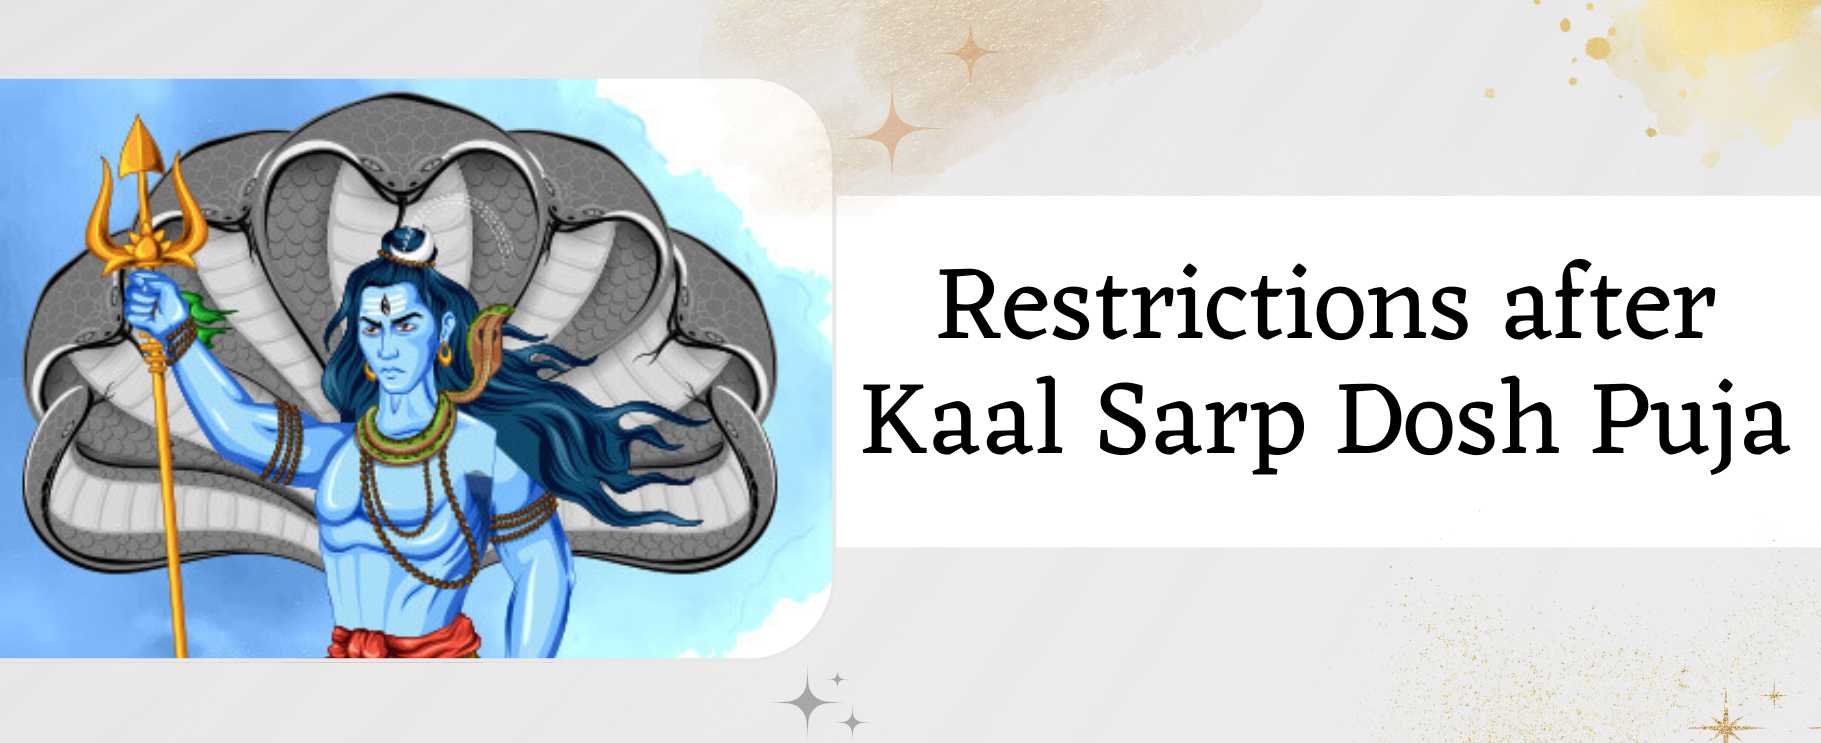 Restrictions-after-Kaal-Sarp-Dosh-puja